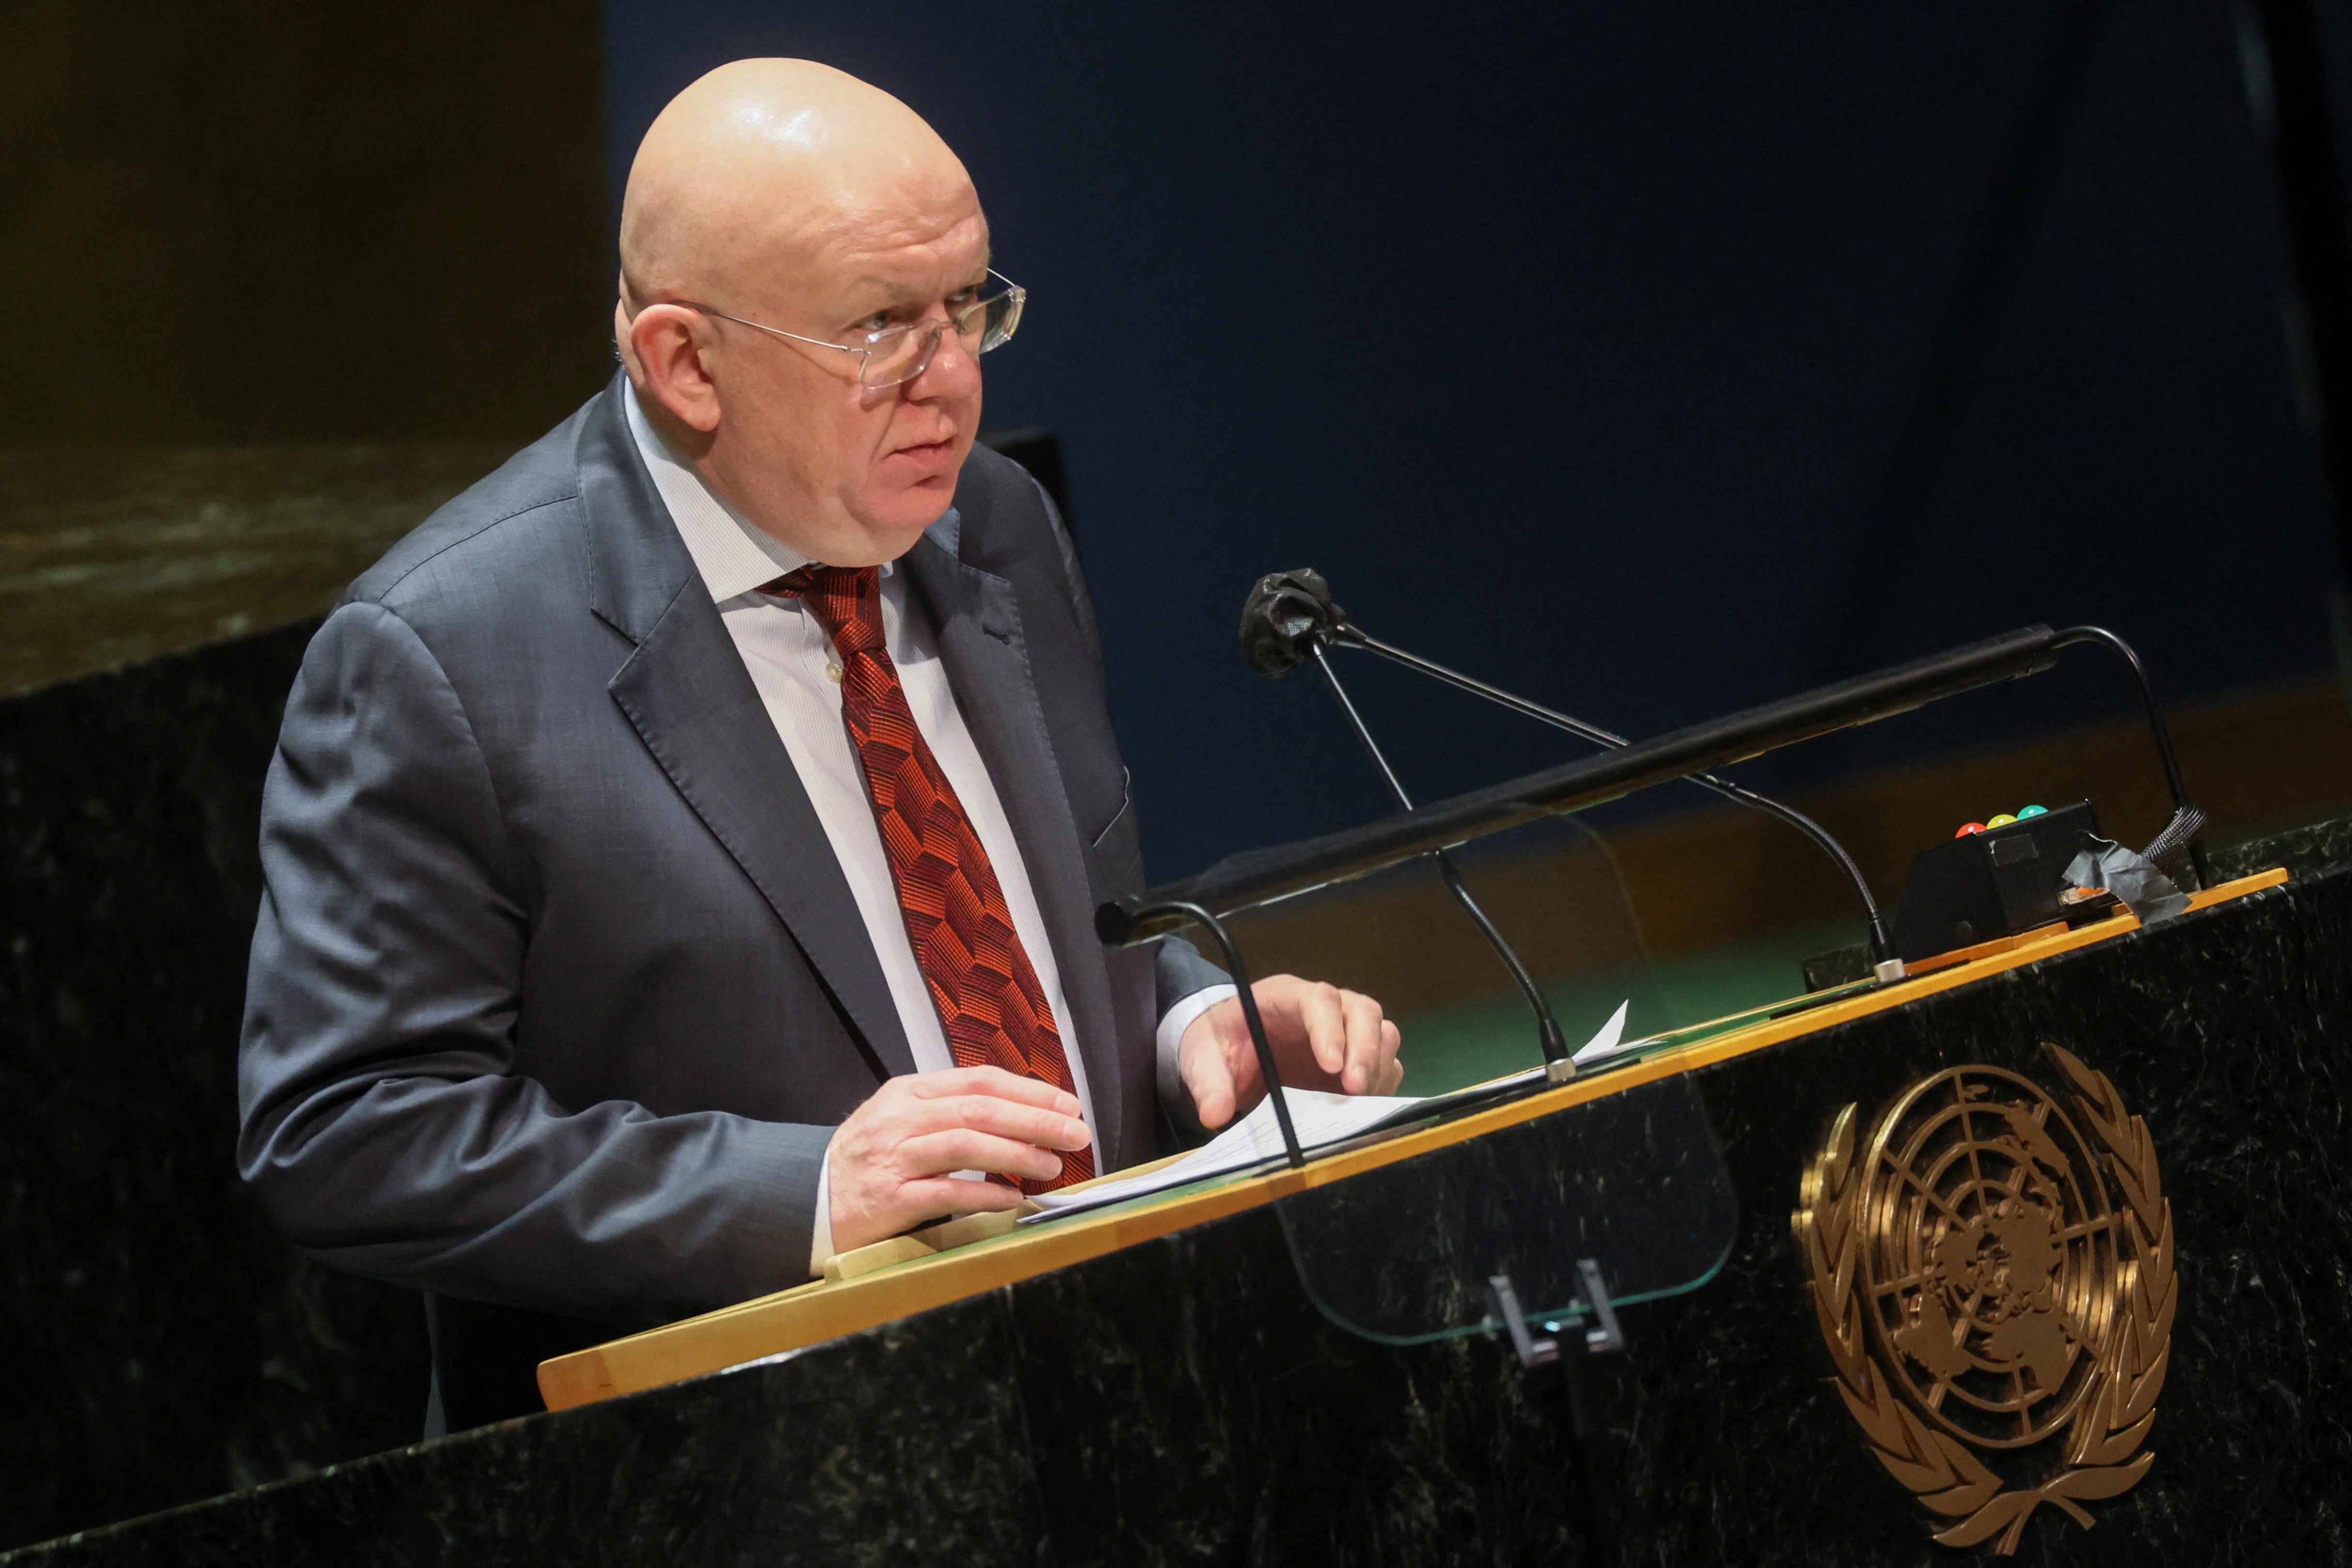 Russian Ambassador to the UN Vassily Nebenzia addresses a special session of the UN General Assembly on Russia’s invasion of Ukraine